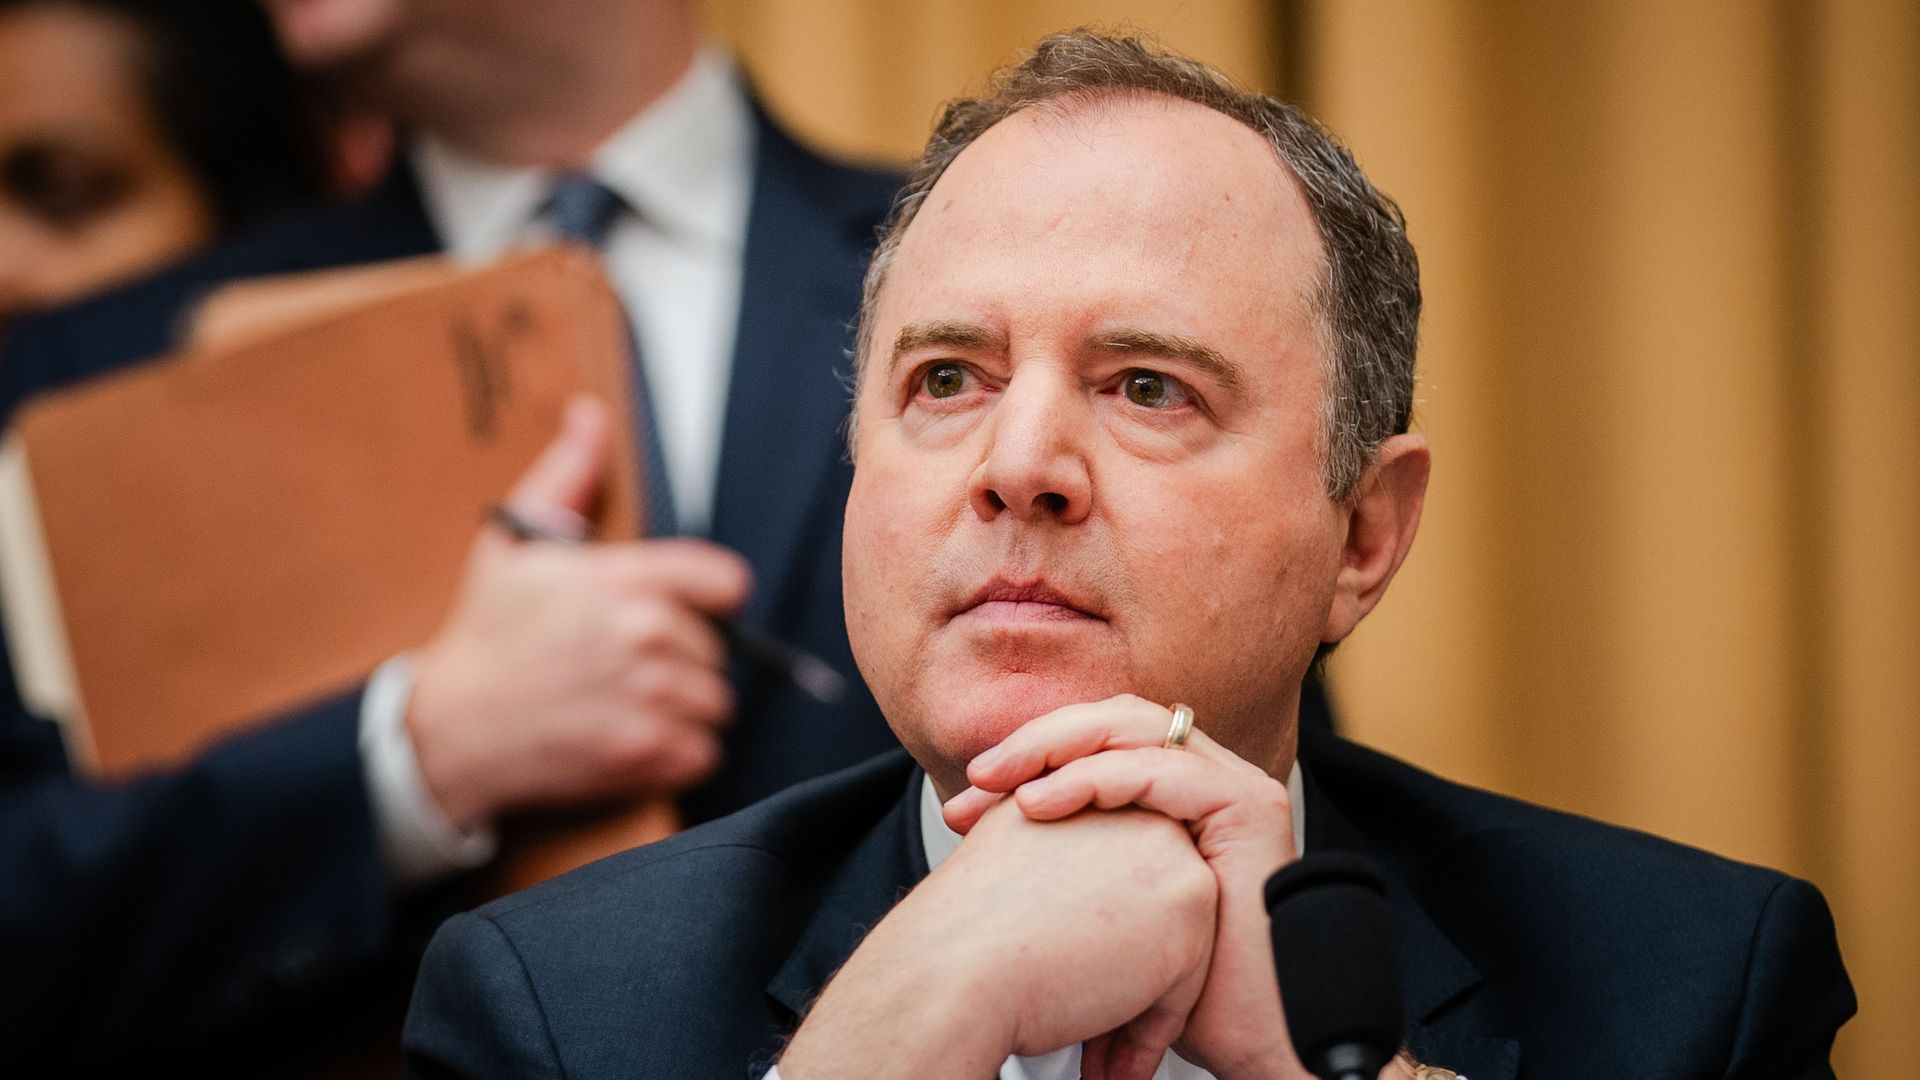 Rep. Adam Schiff during a House hearing this year at the U.S. Capitol.